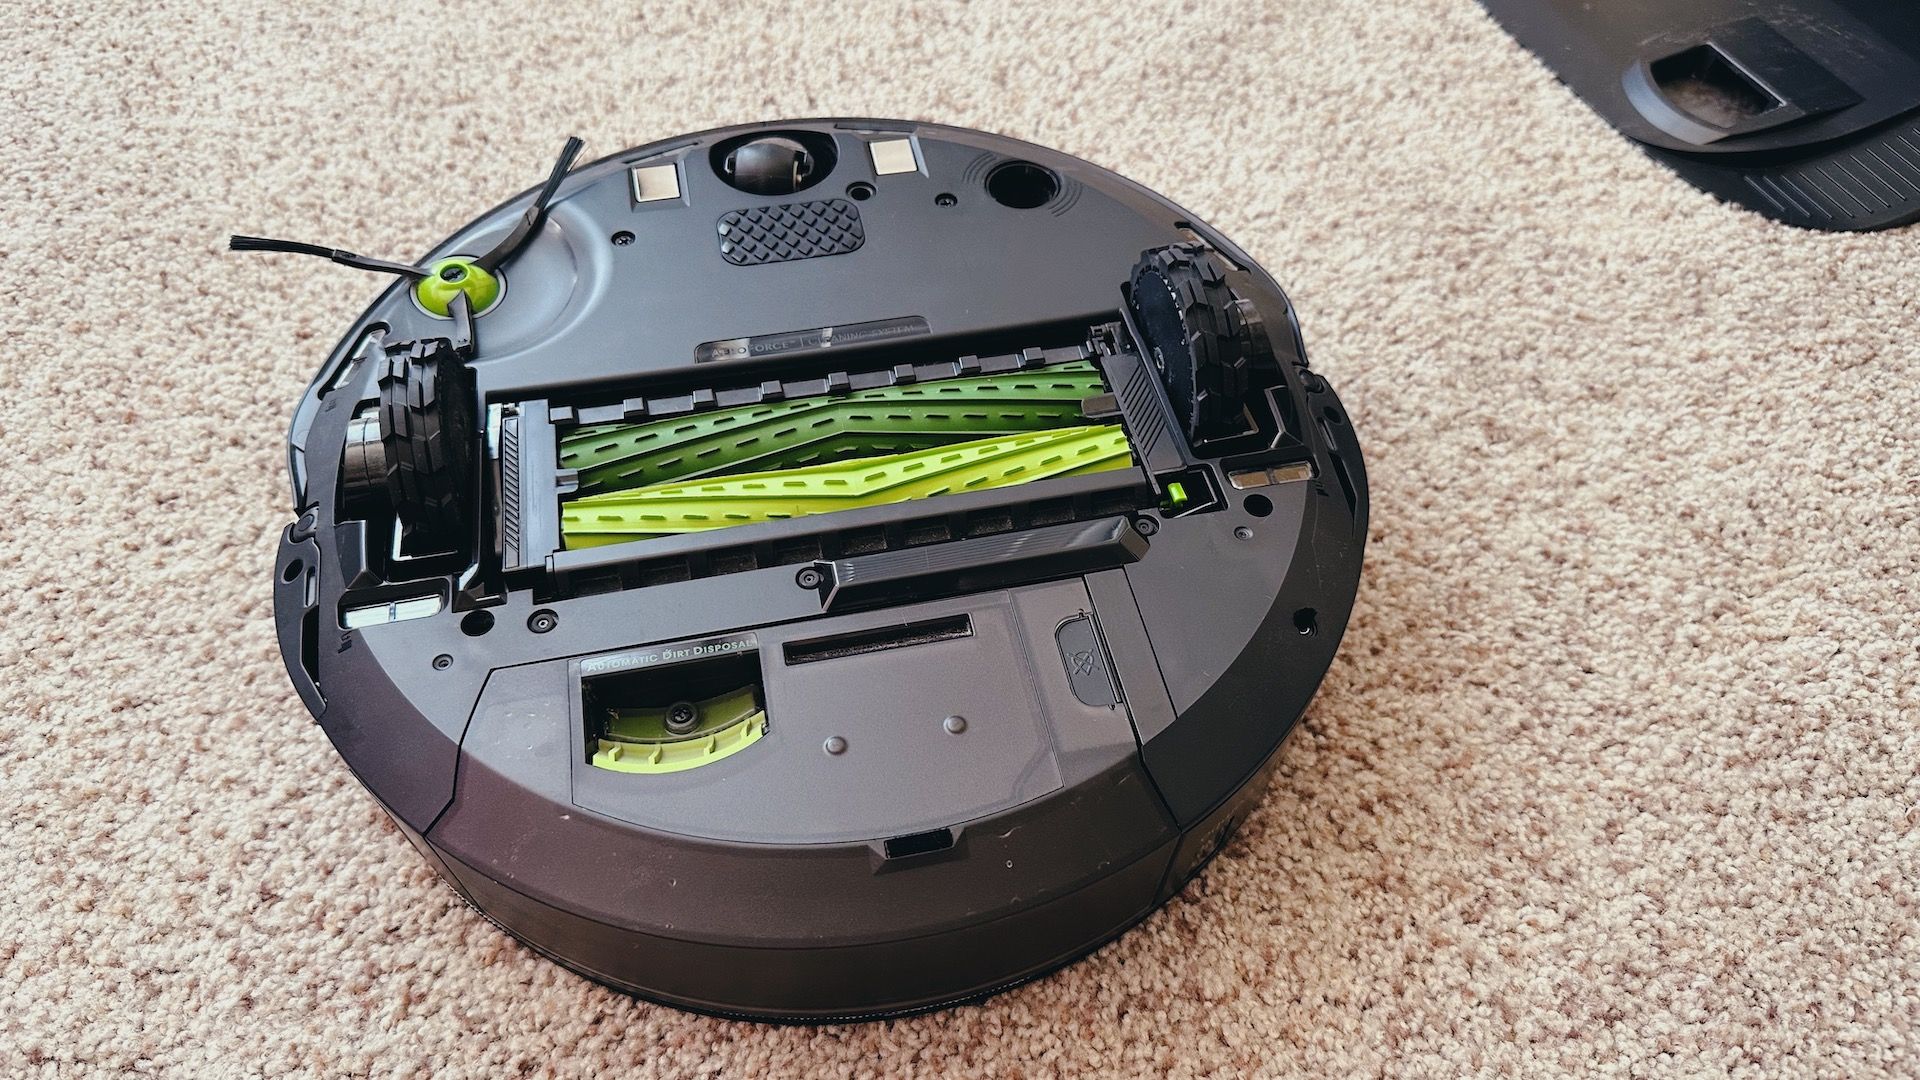 showing the underneath of a robot vacuum